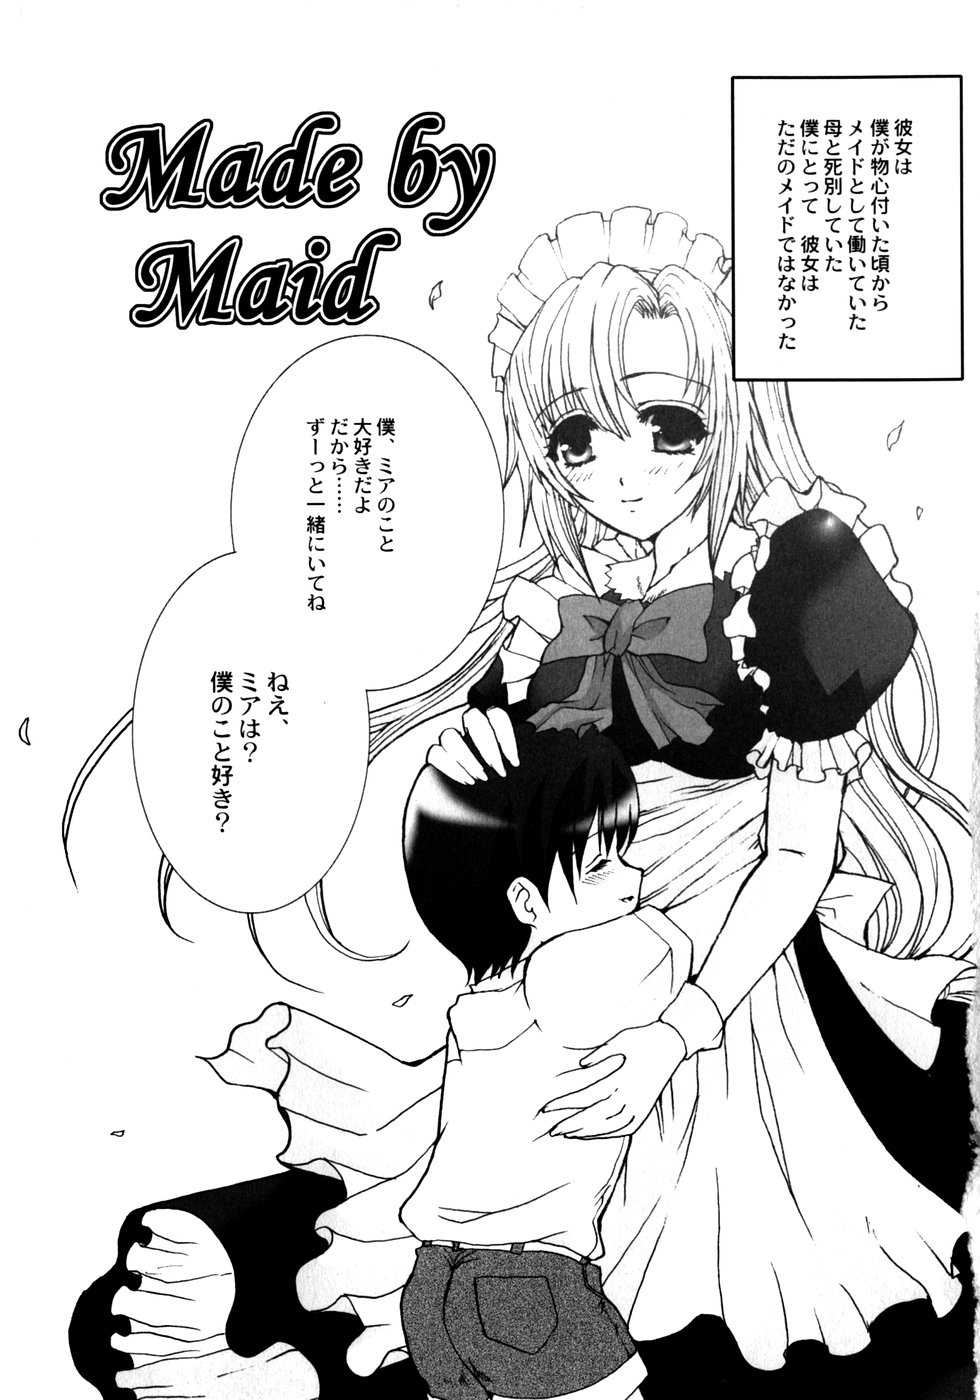 [Neko to Hato] Made by Maid [ねことはと] Made by Maid